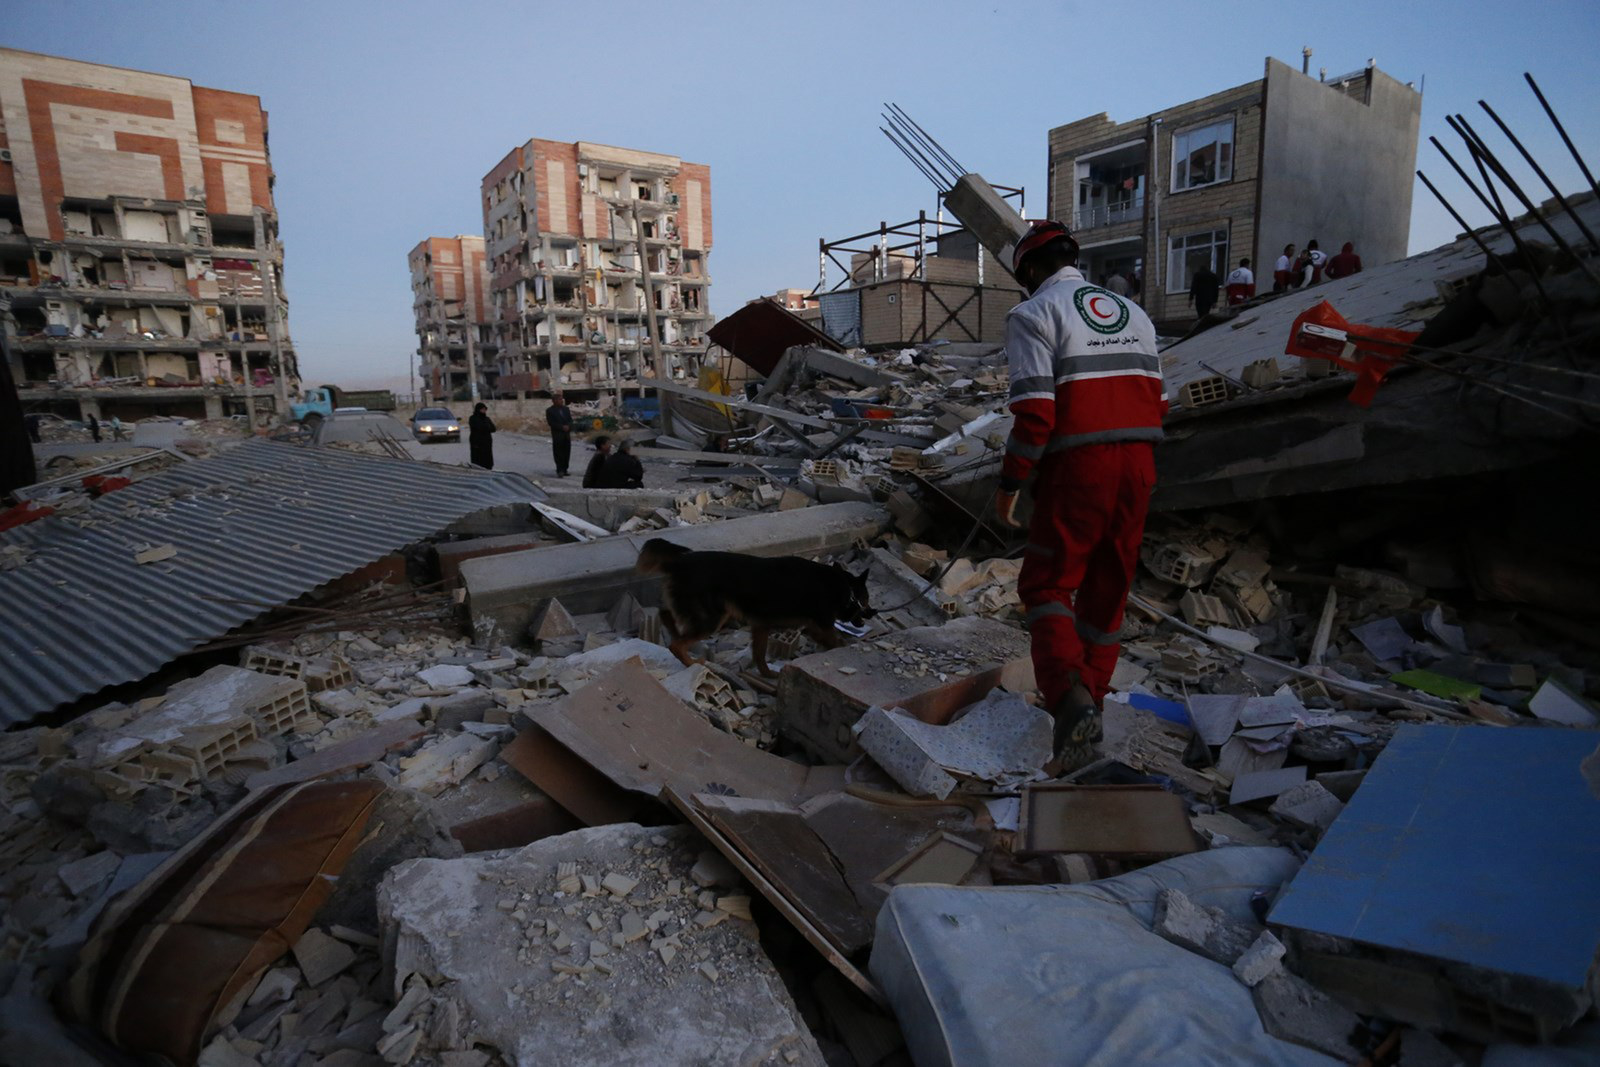 A Powerful Earthquake Has Killed More Than 500 People Near The Iran